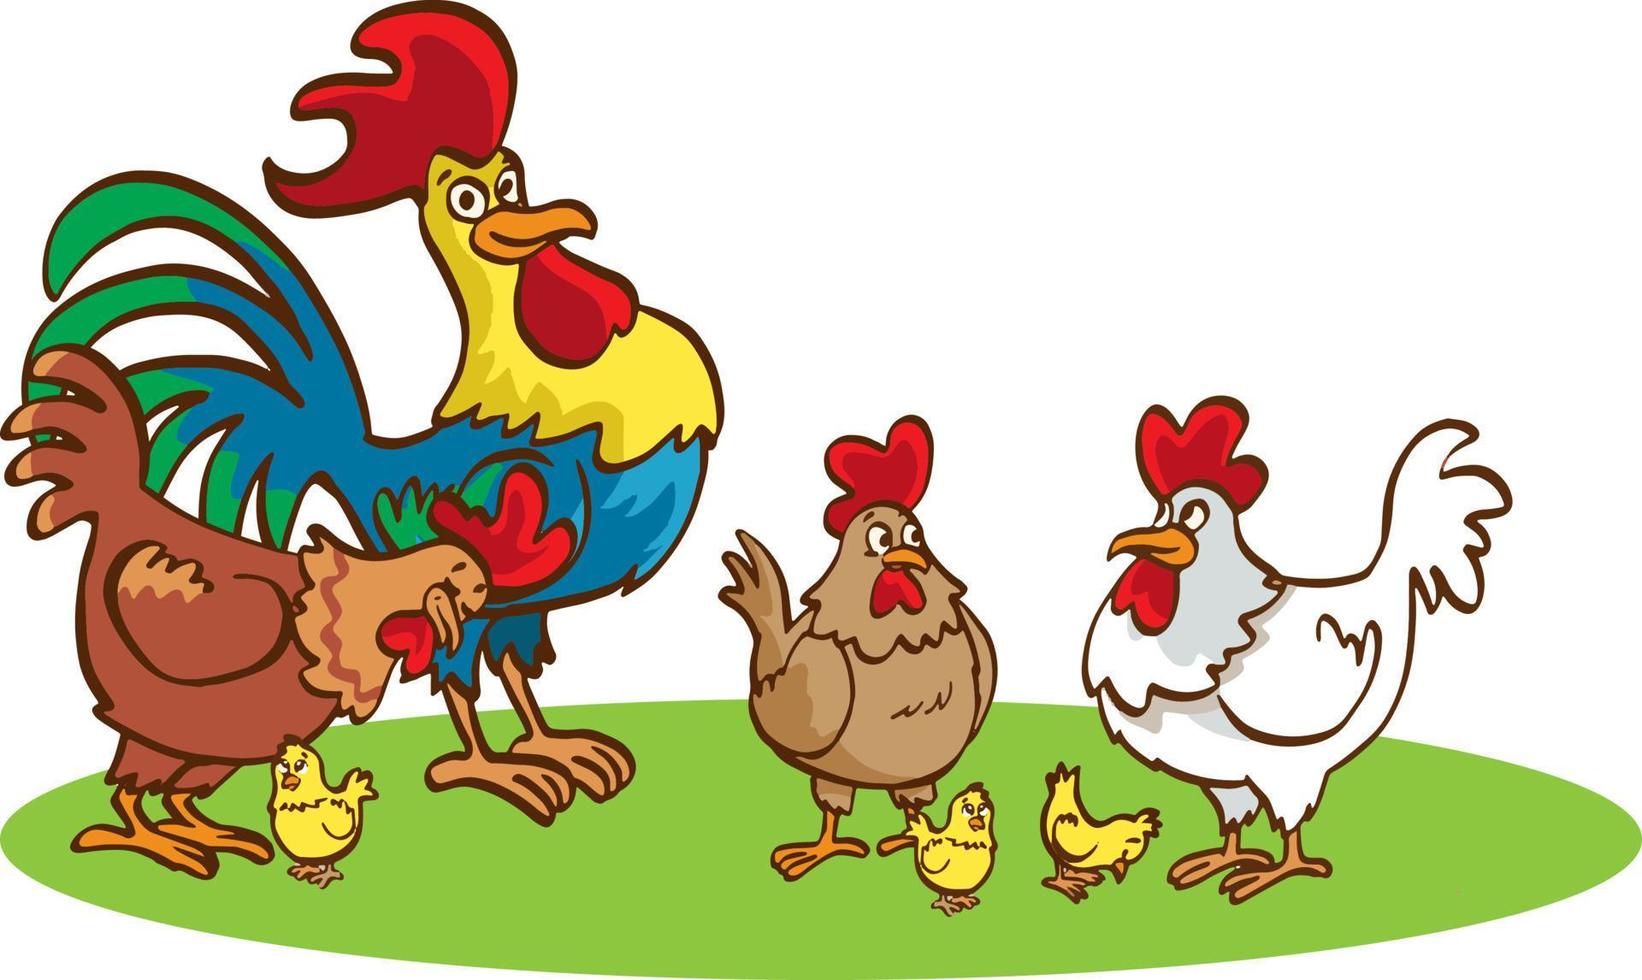 Adult hen and rooster with chickens on a white background. Cute chicken family with their chickens in cartoon style. vector